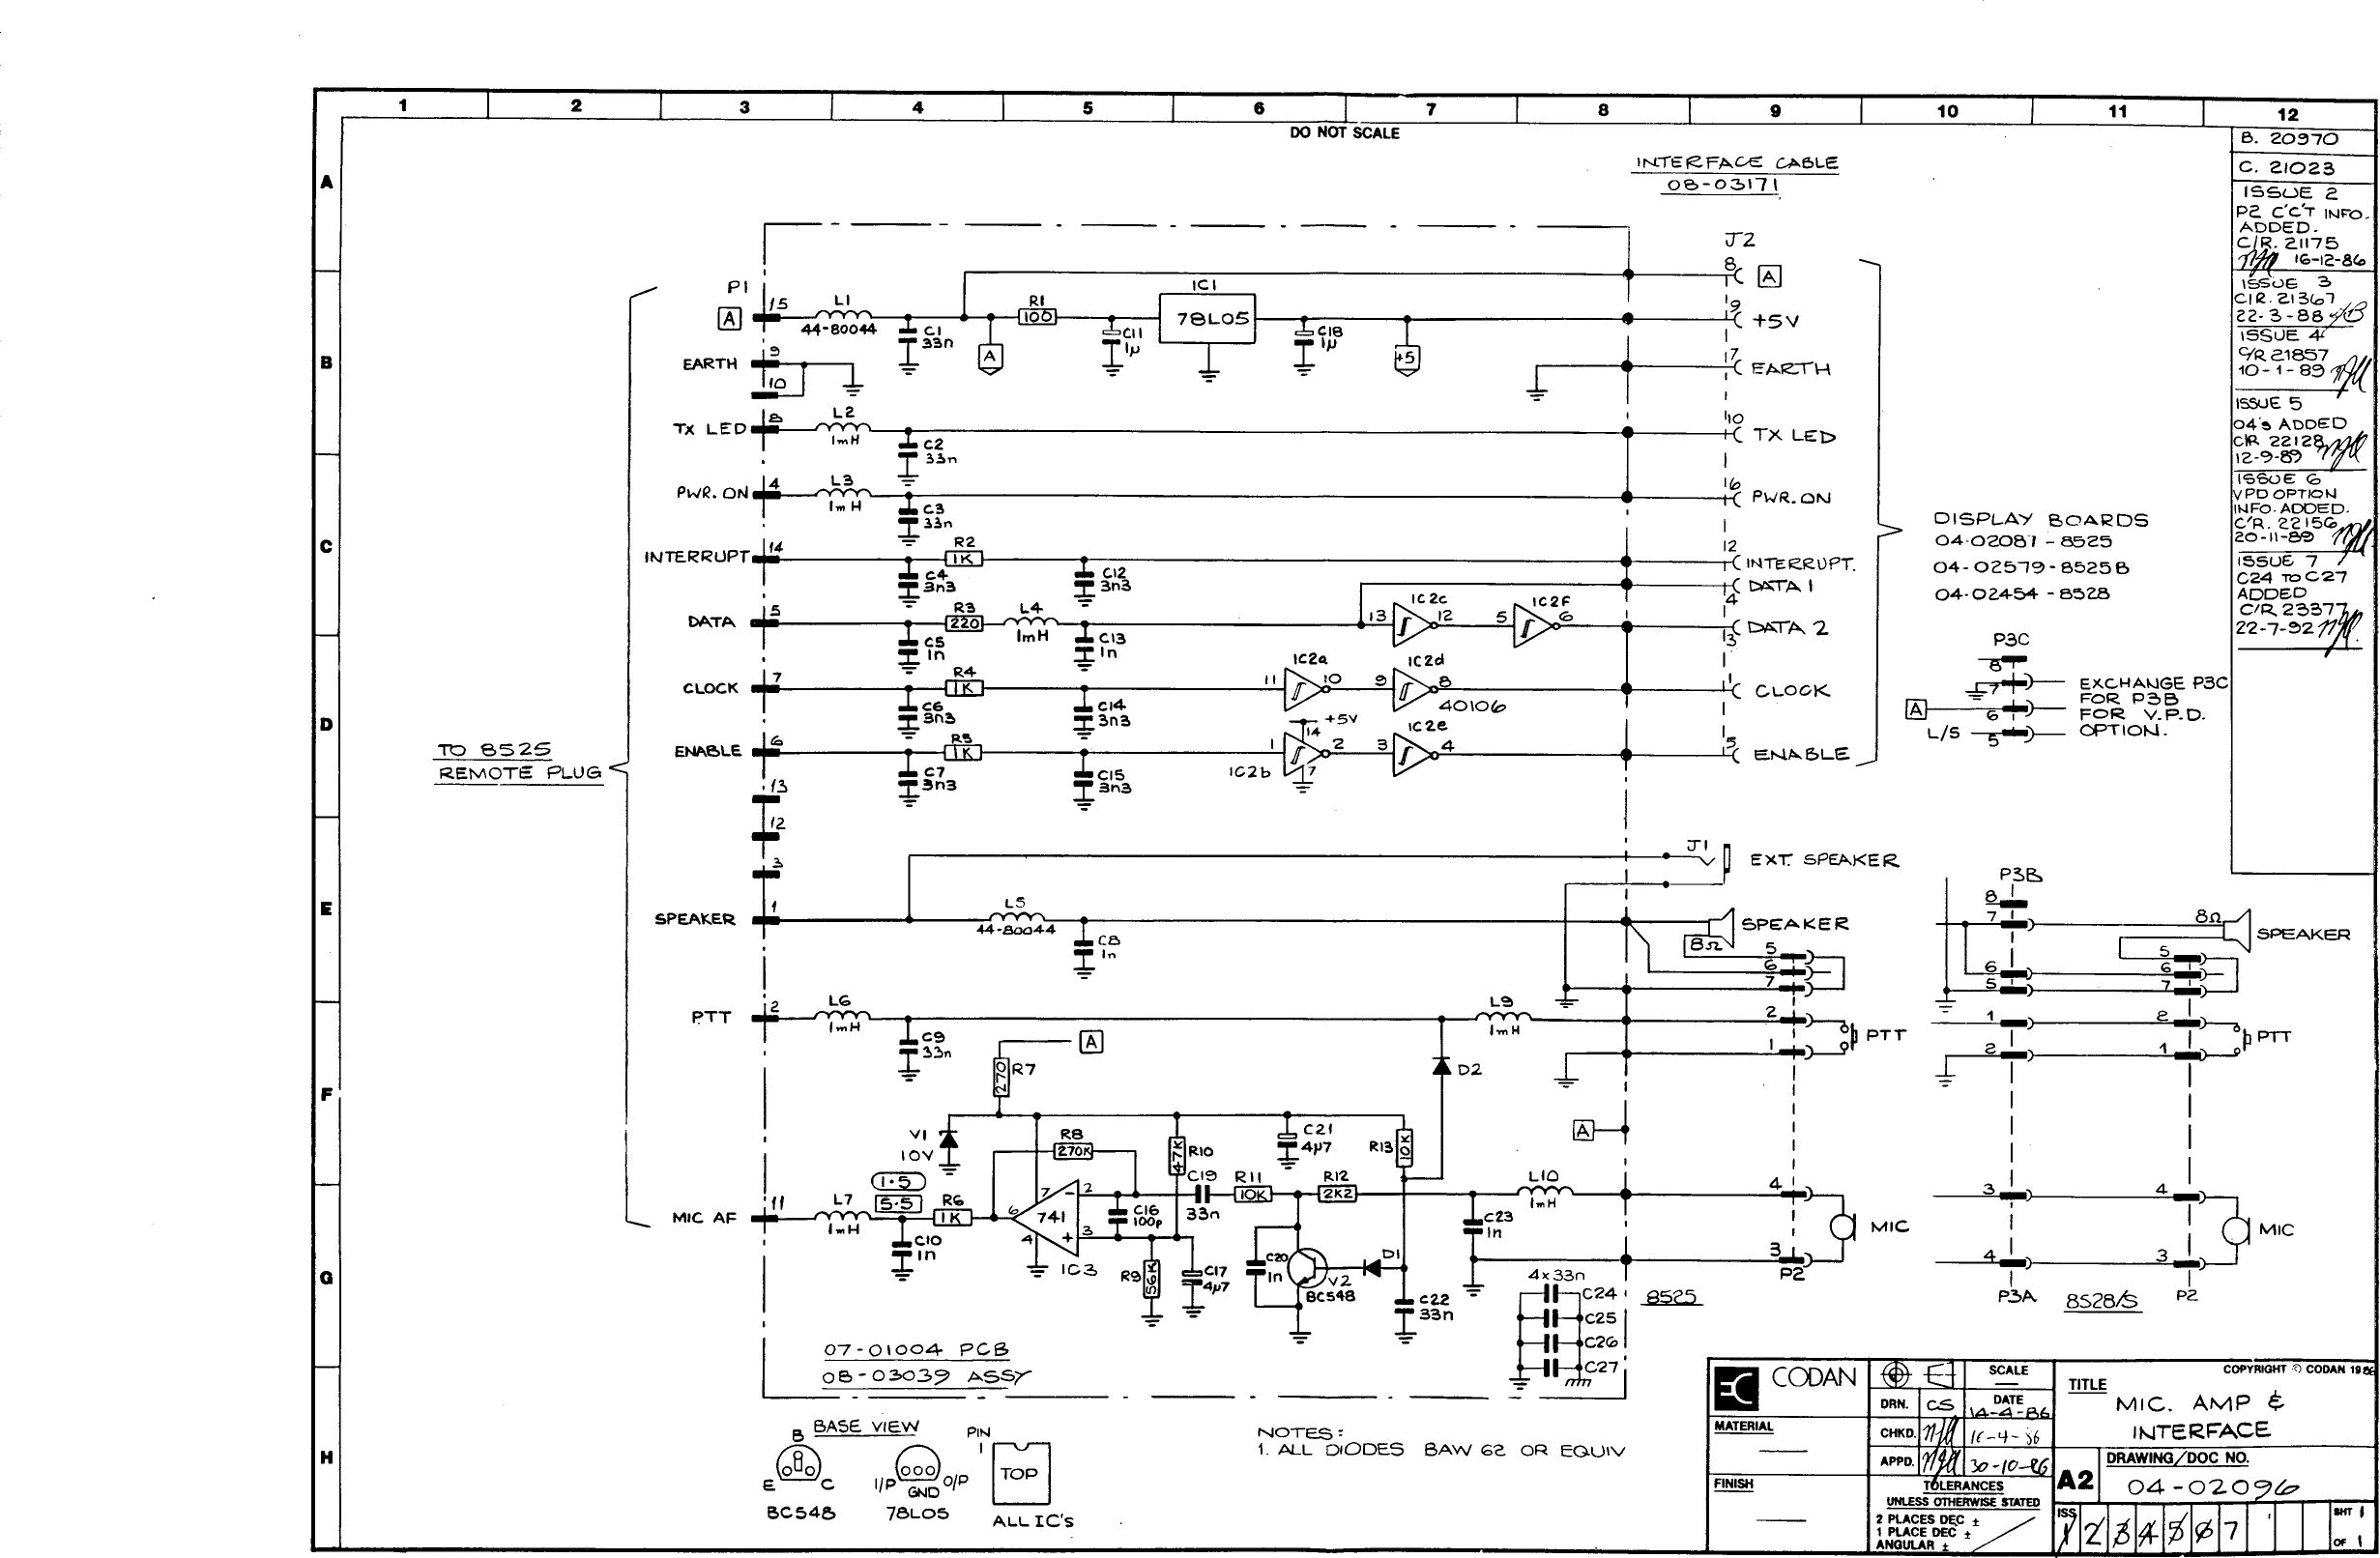 Page 1 of 1 - Codan Obsolete CD/data/tsm/8525-8528/drawings/schematic/(04-02096) Mic Amp & Interface (04-02096)